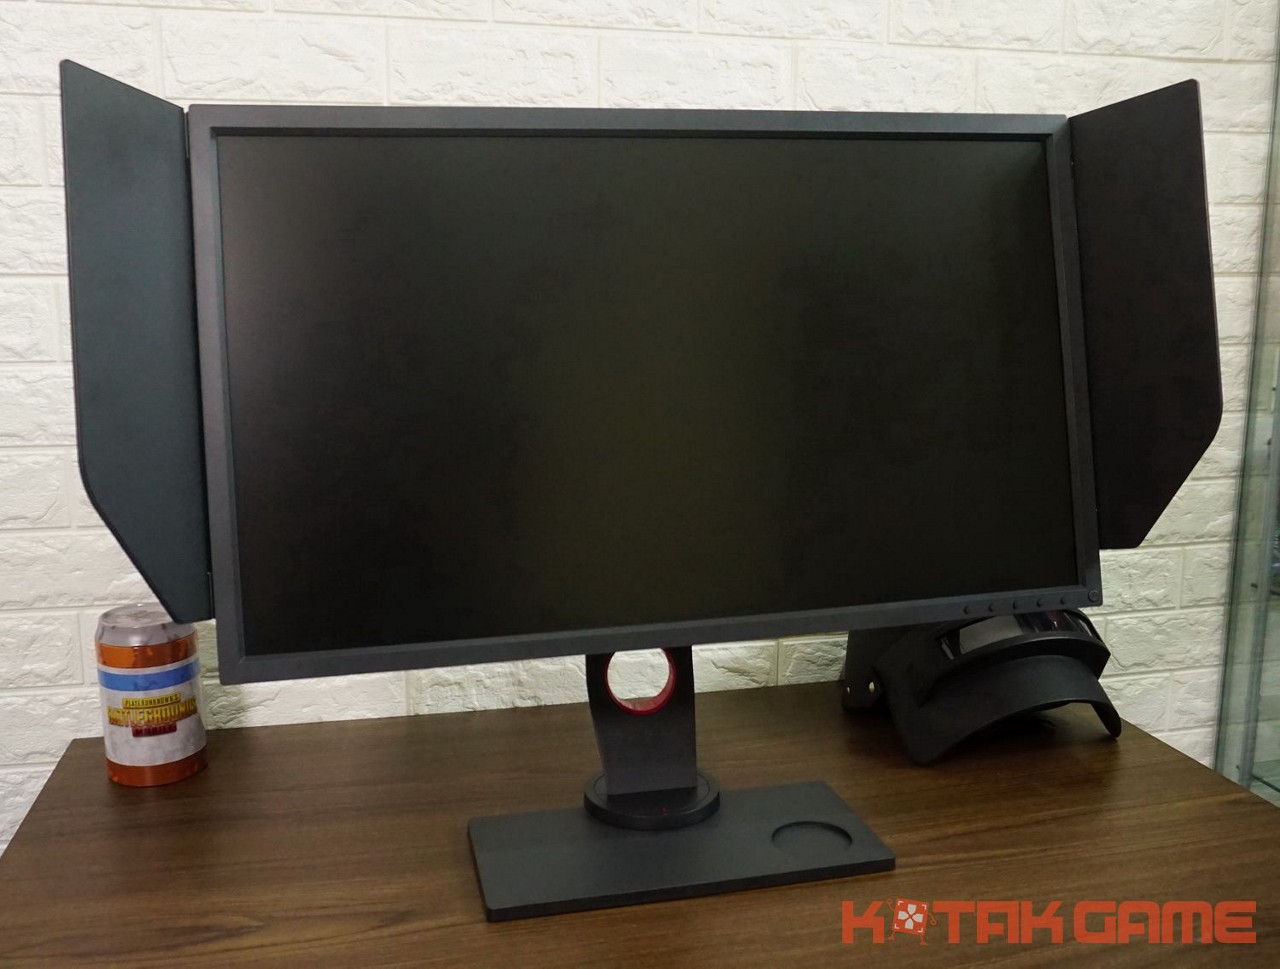 benq-zowie-monitor-gaming-240-hz-by-kotakgame-06